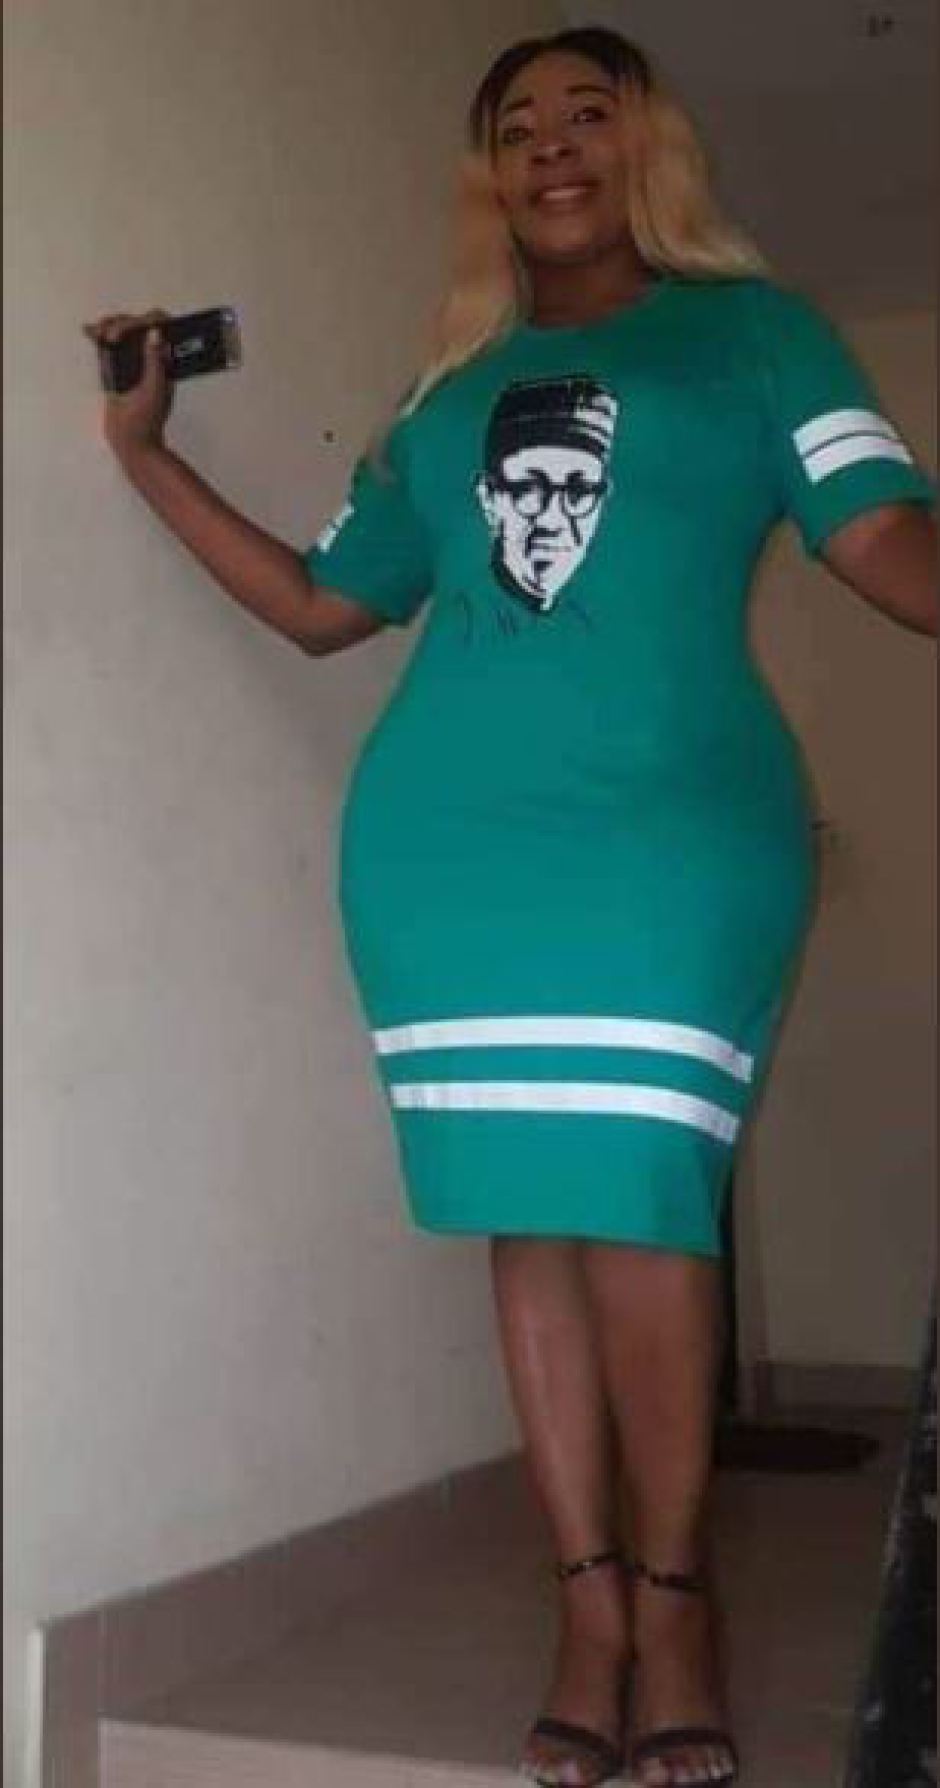 More Hot Photos Of Slay Queens Campaigning For President Buhari Surface Online